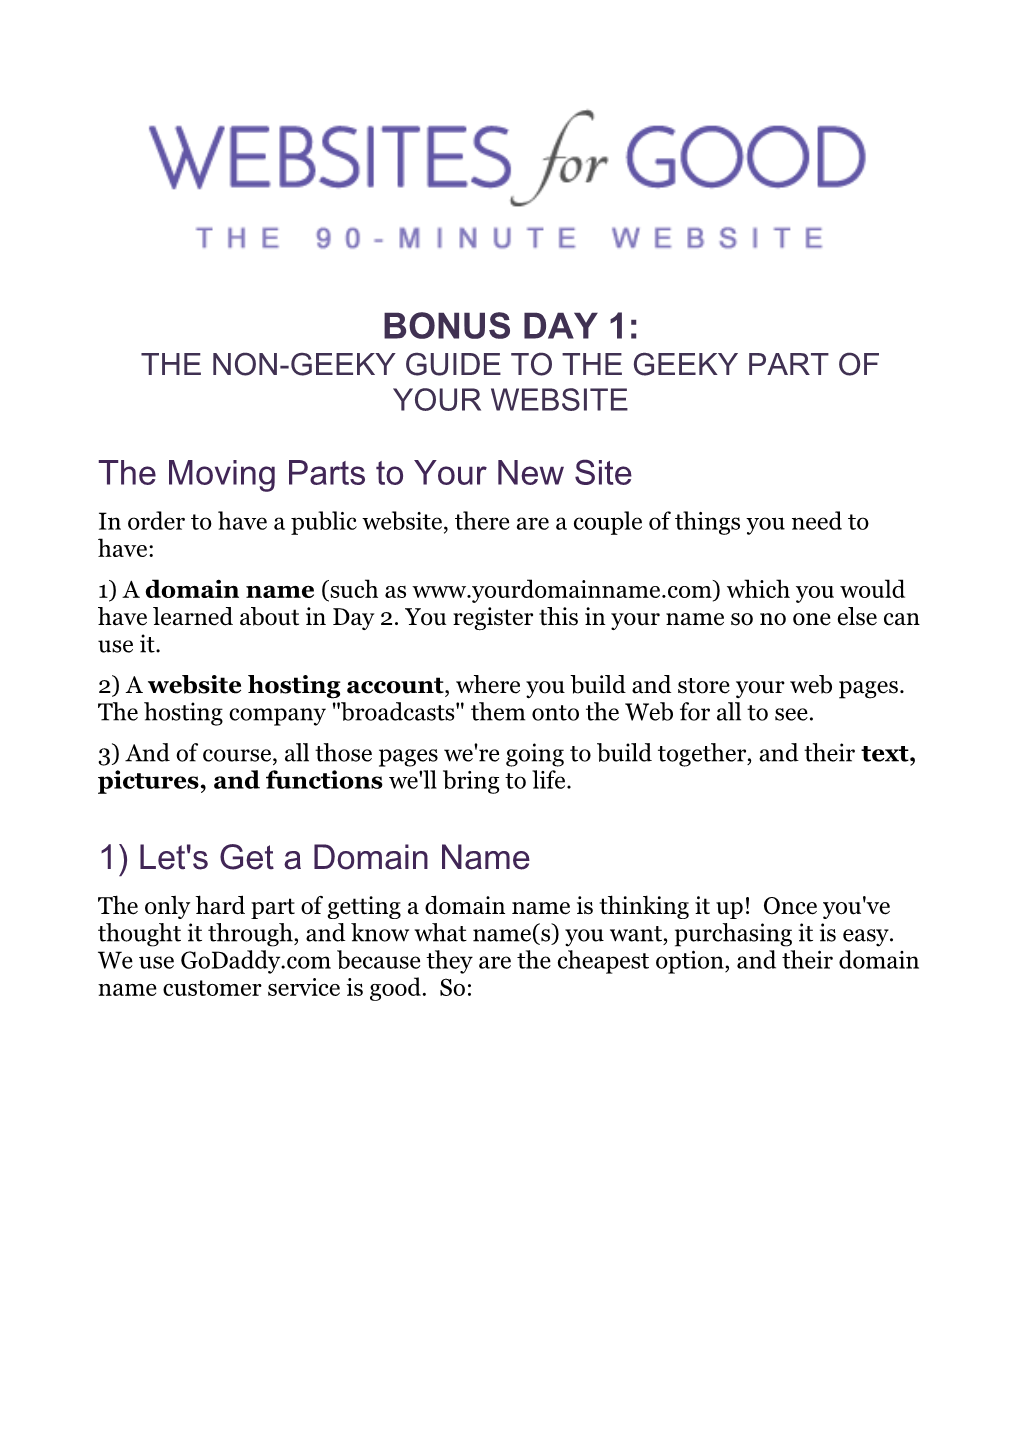 The Moving Parts to Your New Site